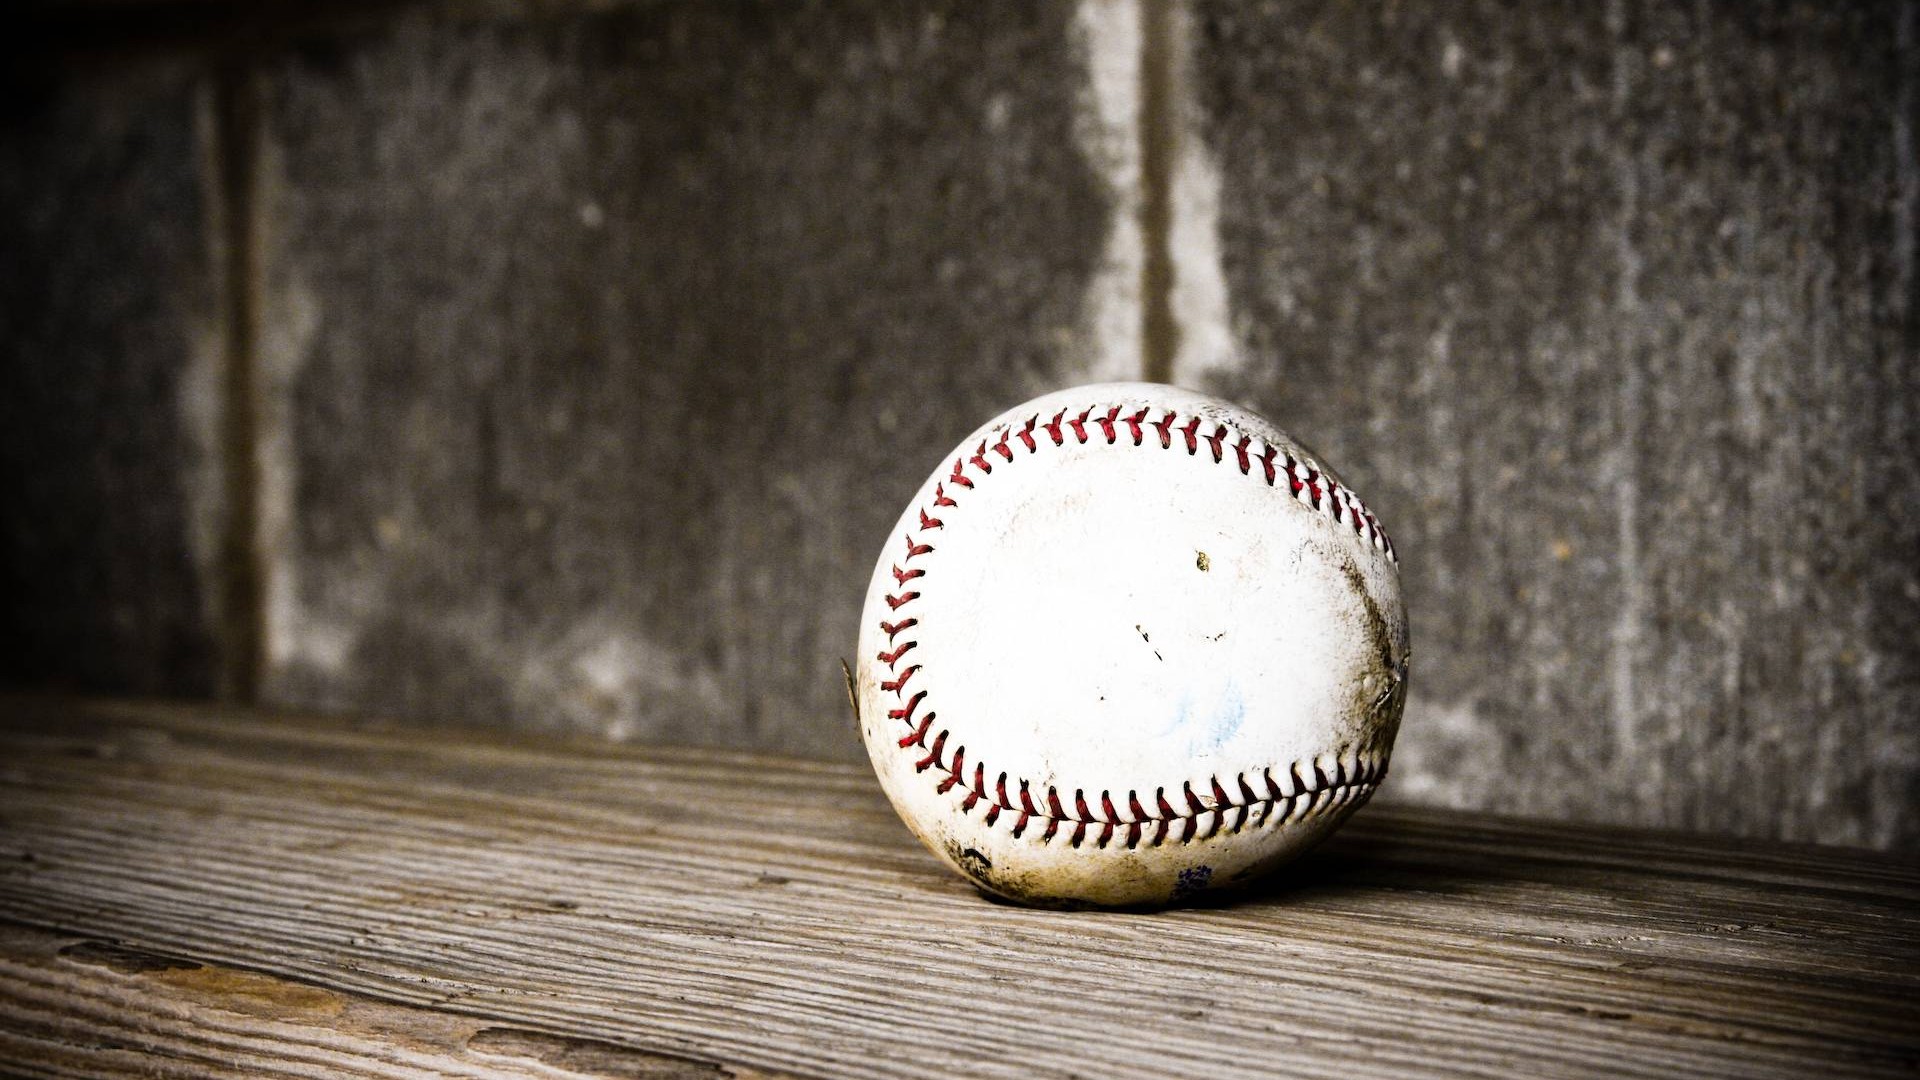 Baseball Wallpaper HD with high-resolution 1920x1080 pixel. You can use this wallpaper for Mac Desktop Wallpaper, Laptop Screensavers, Android Wallpapers, Tablet or iPhone Home Screen and another mobile phone device